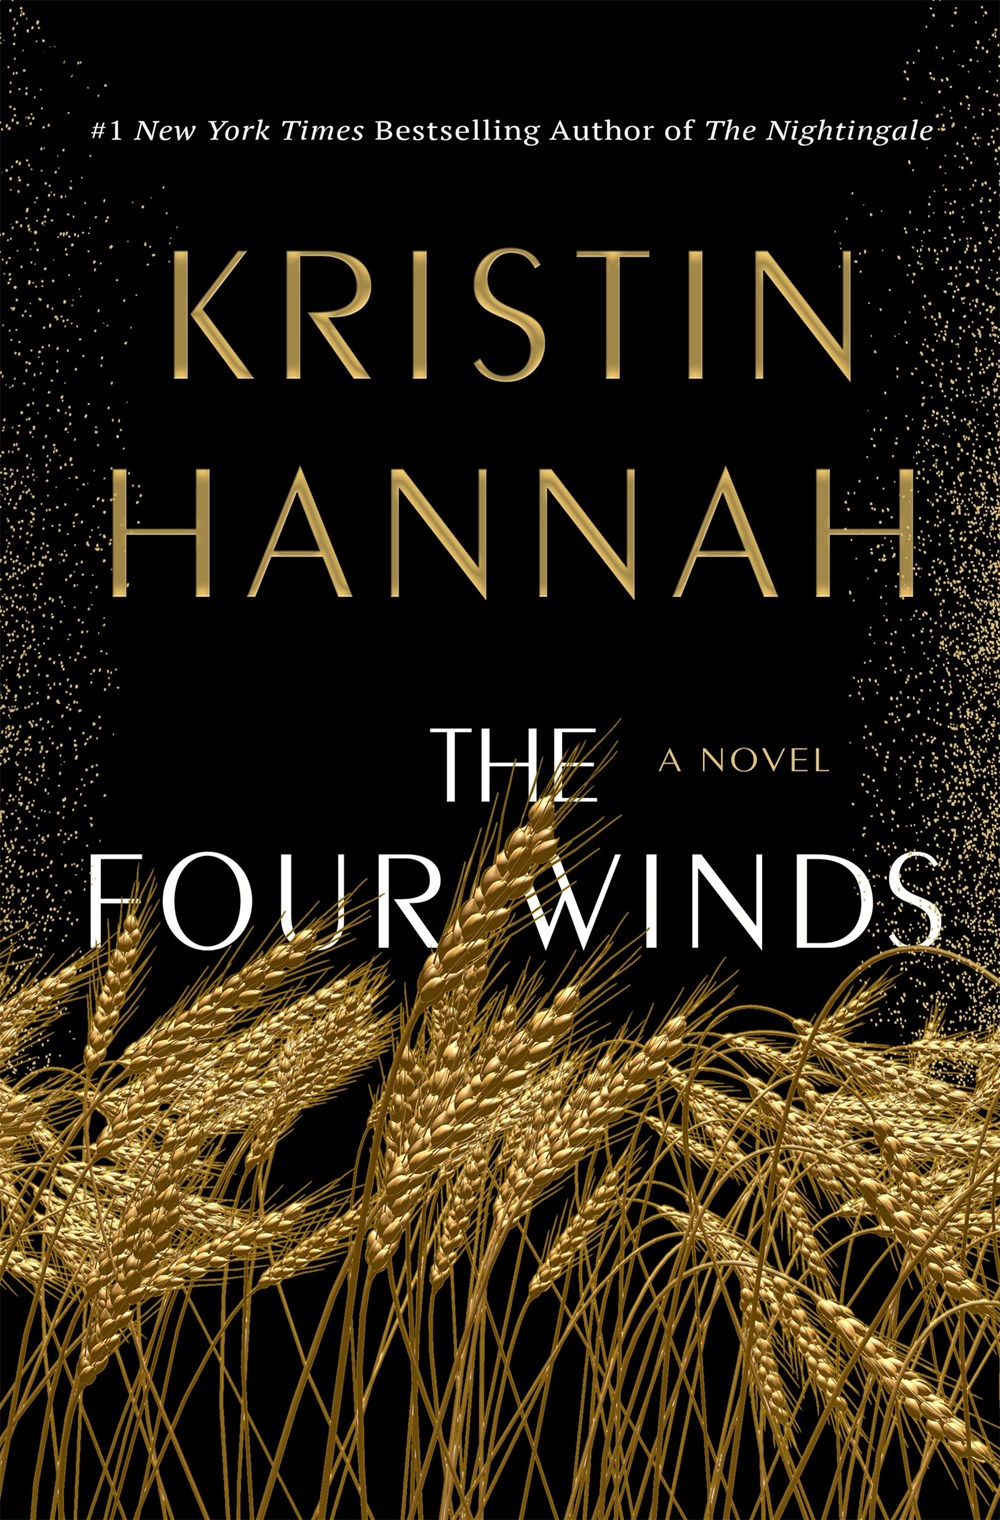 Read-Alikes for “The Four Winds” by Kristin Hannah | LibraryReads